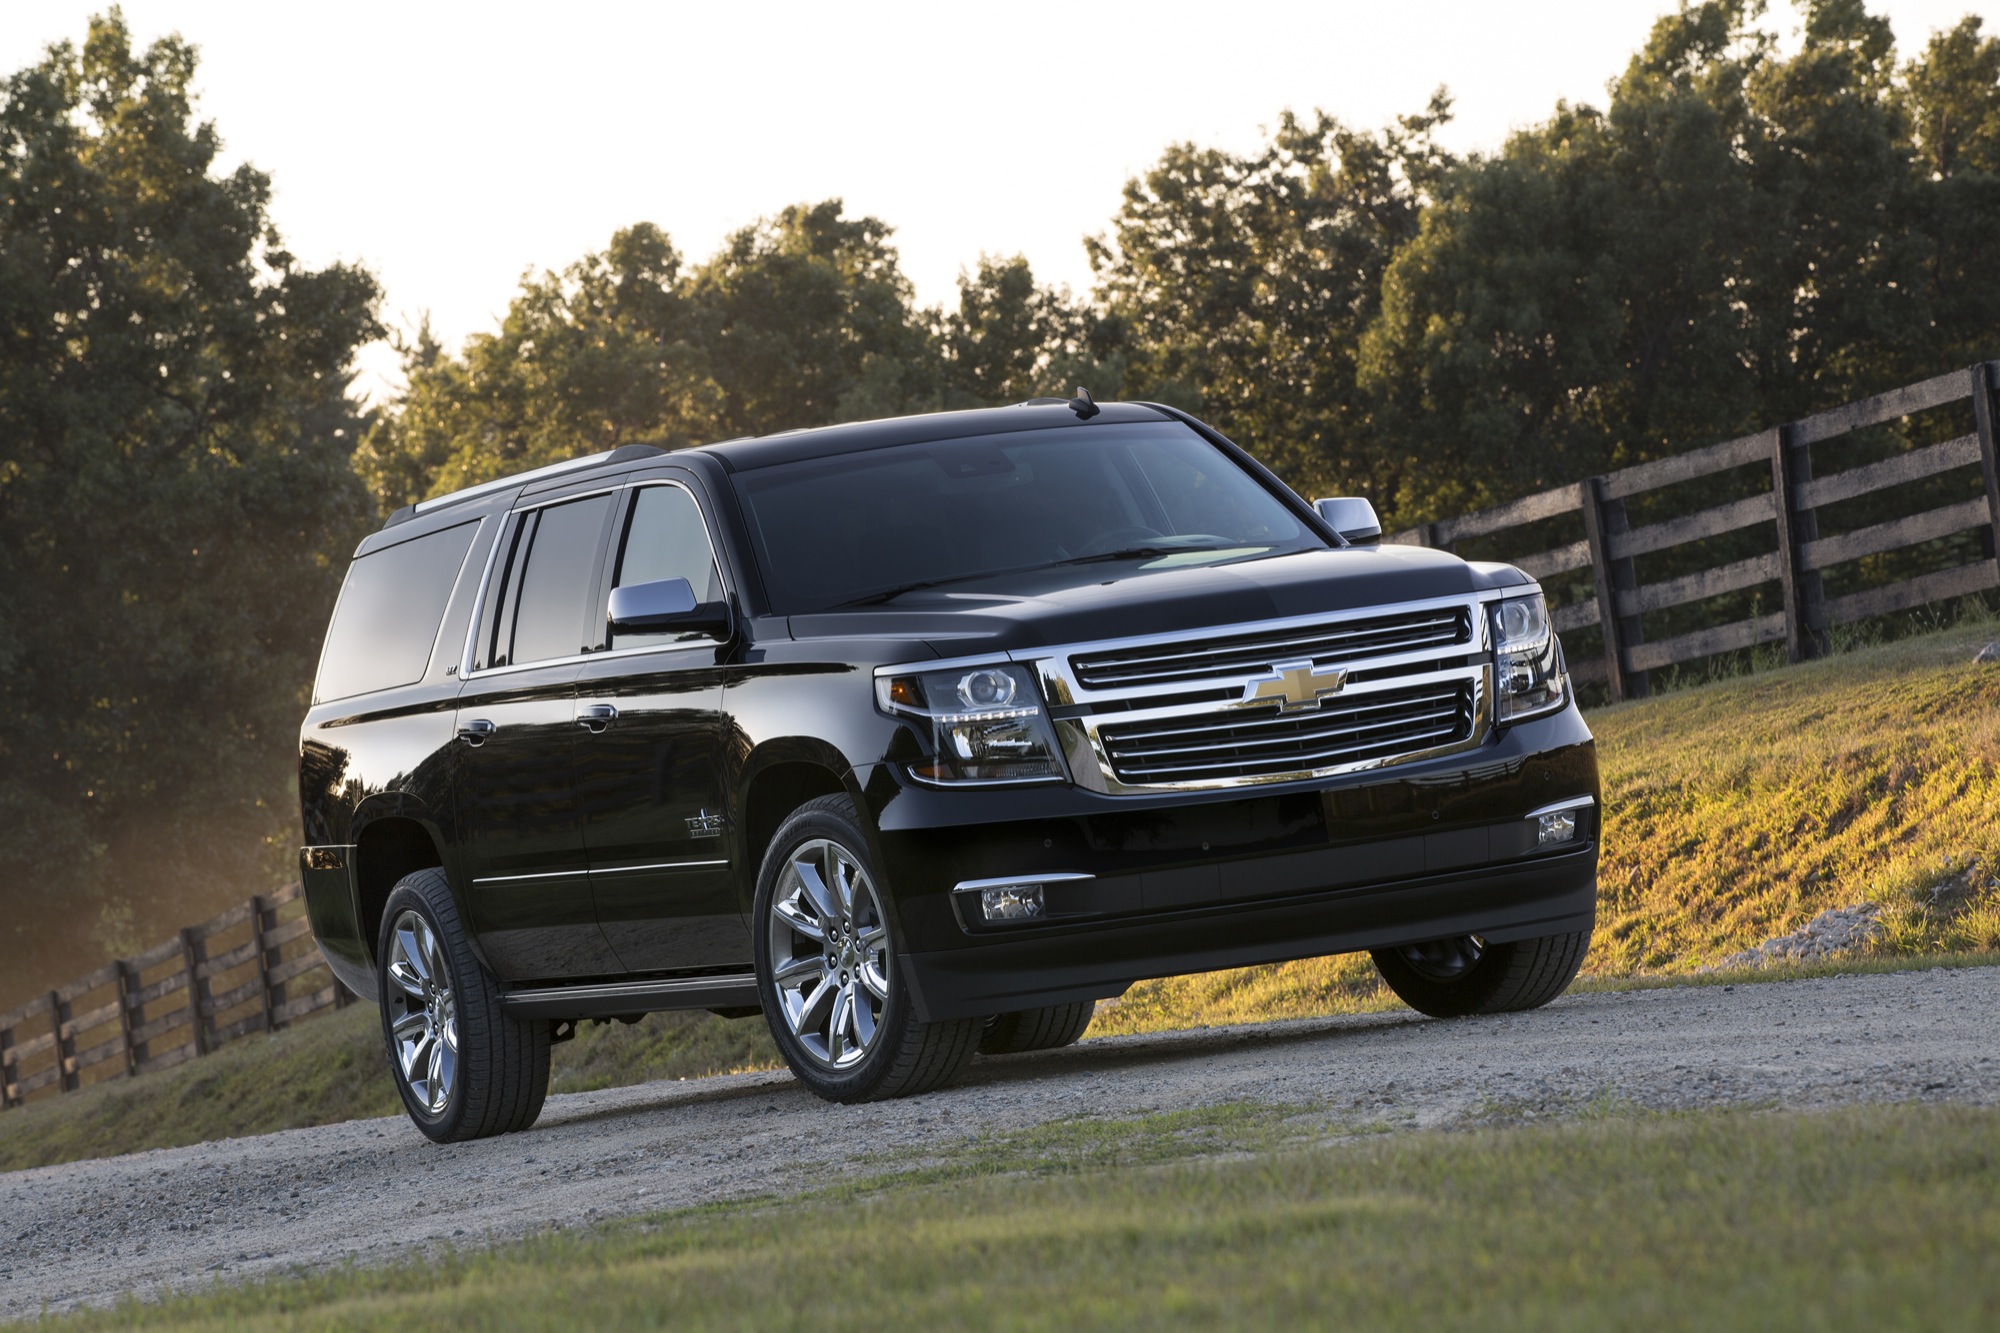 2017 Chevy Suburban Changes, Updates Detailed | GM Authority